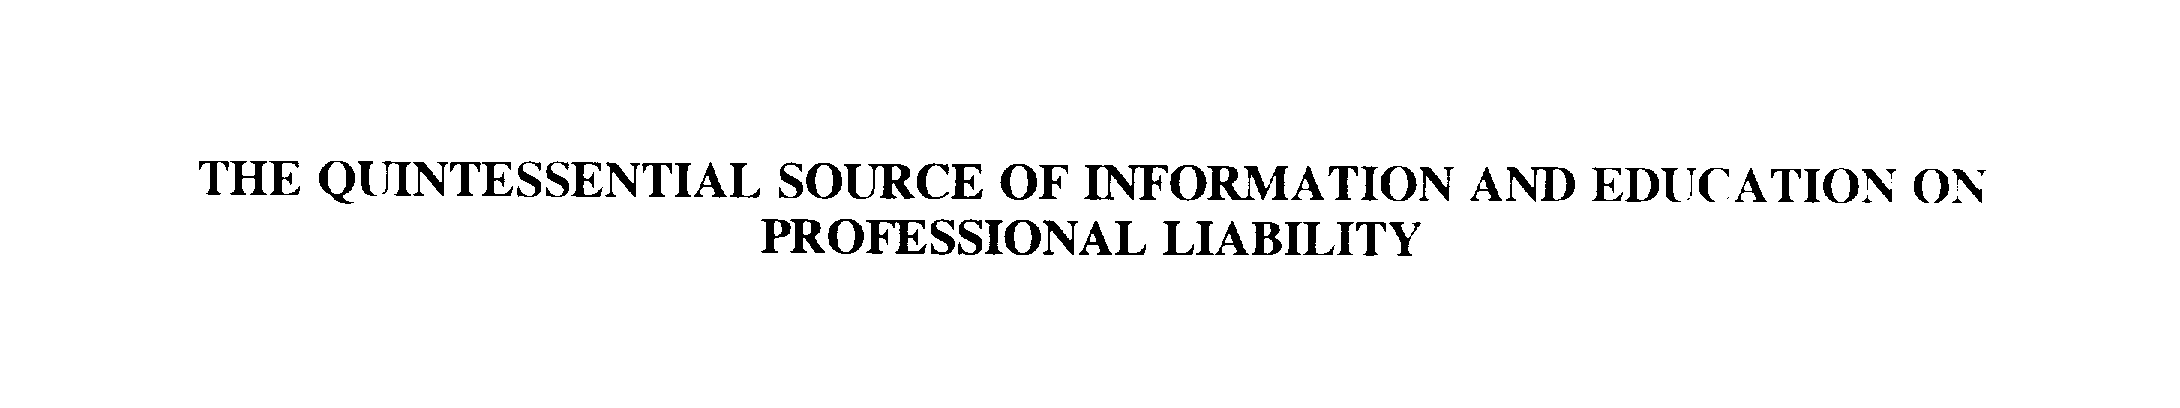  THE QUINTESSENTIAL SOURCE OF INFORMATION AND EDUCATION ON PROFESSIONAL LIABILITY